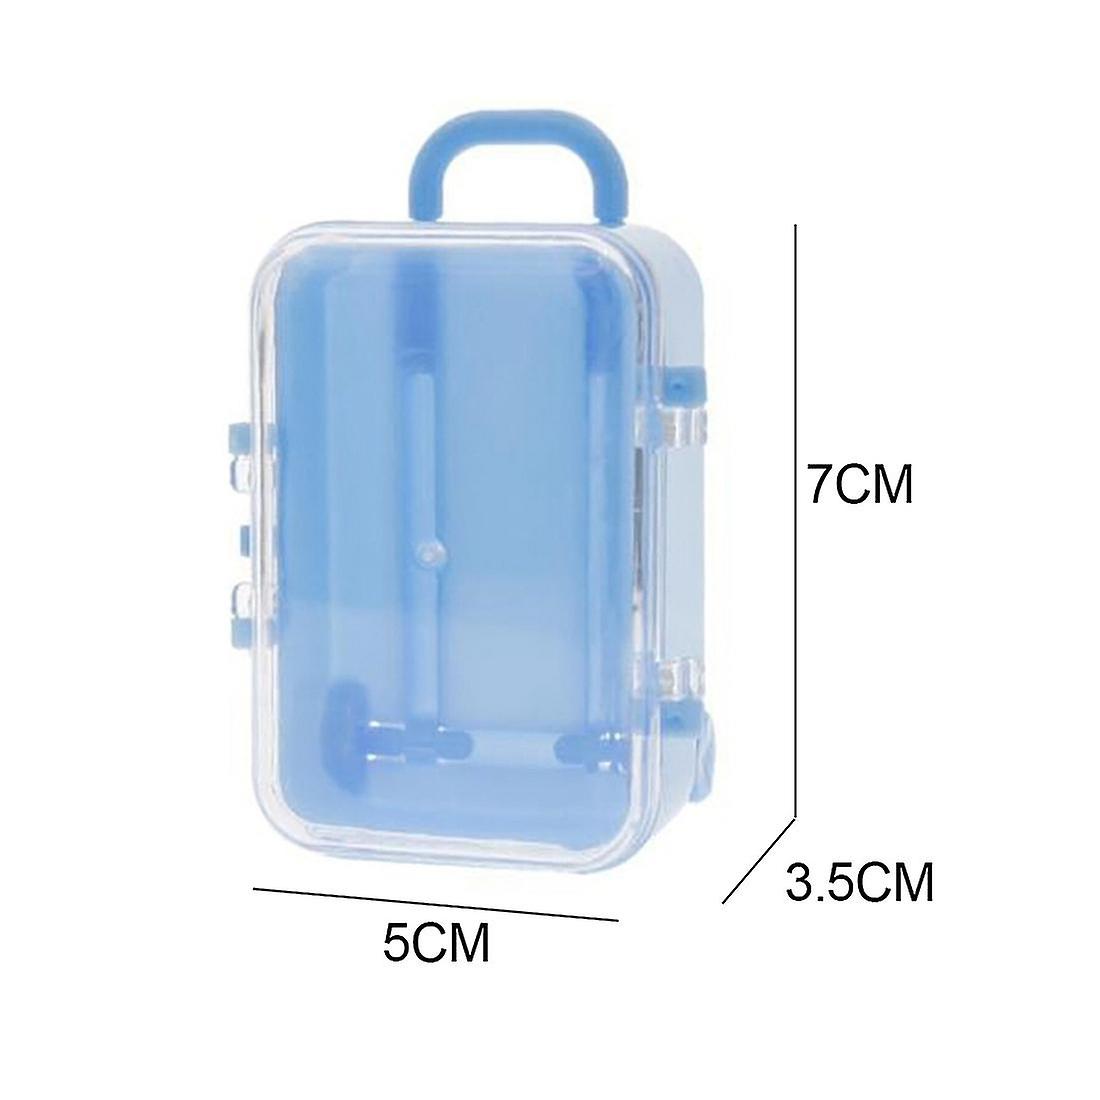 Blue Mini Roller Travel Suitcase Candy Box Personality Creative Wedding Candy Box Luggage Trolley C